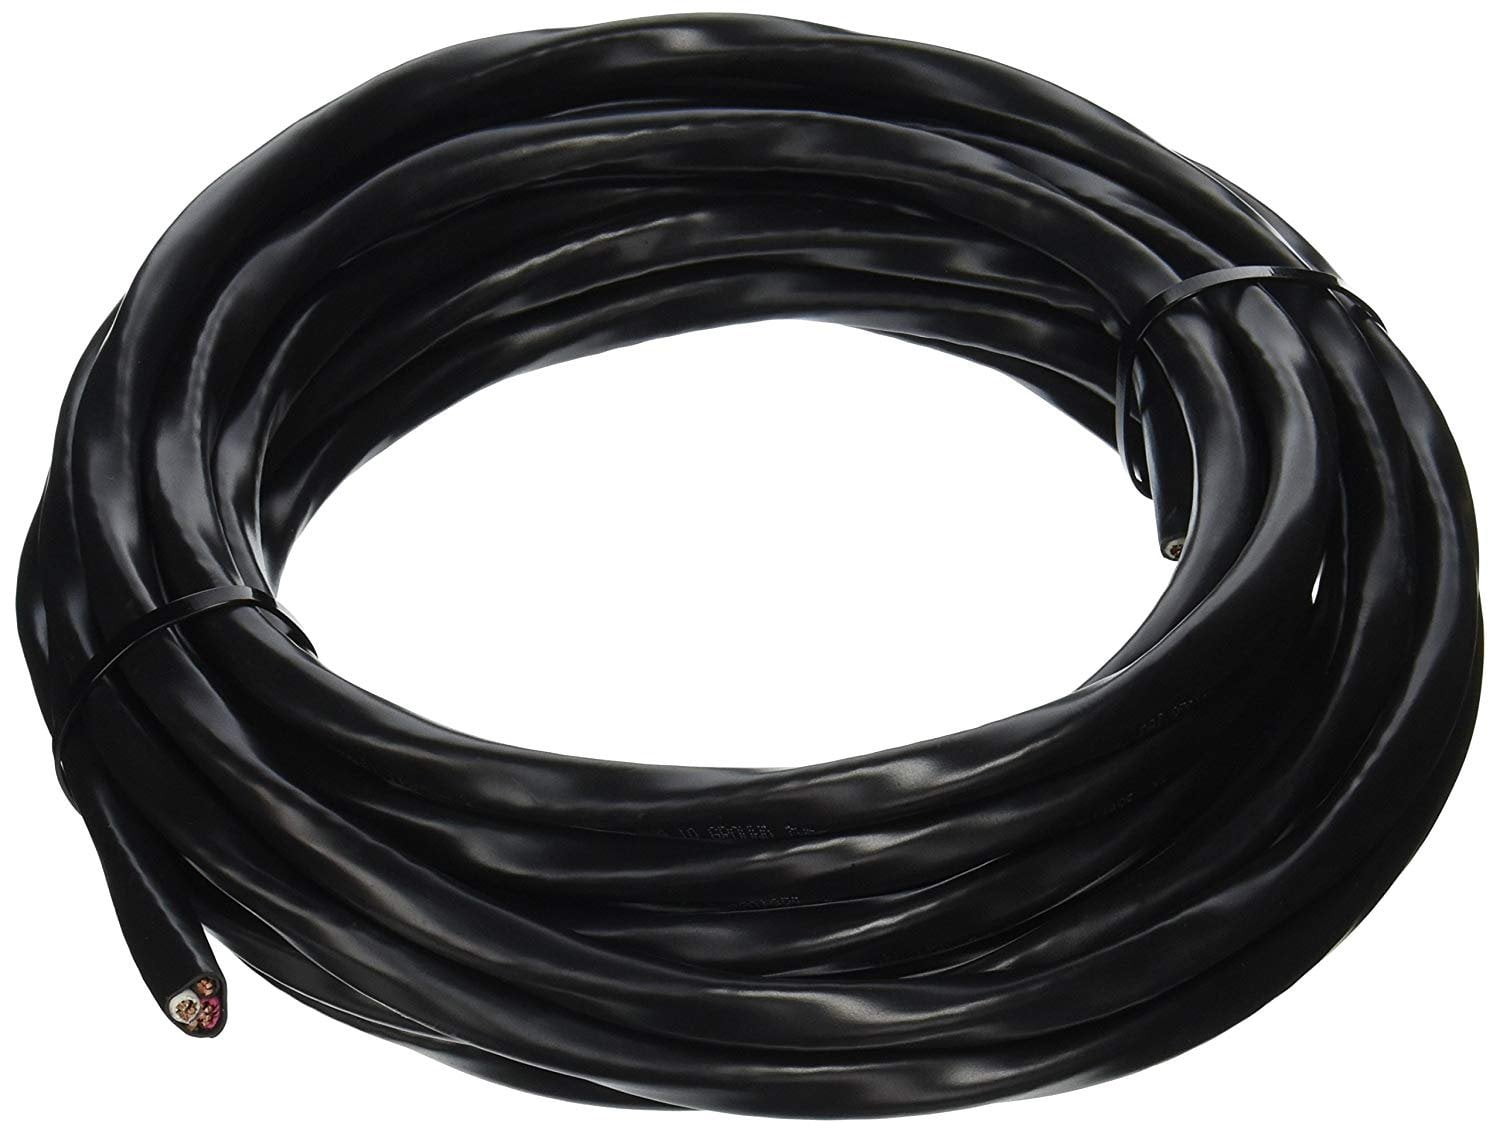 25’ 10/2 W/Ground Wire Nonmetallic Sheathed Cable COPPER WIRE Cut To Order 